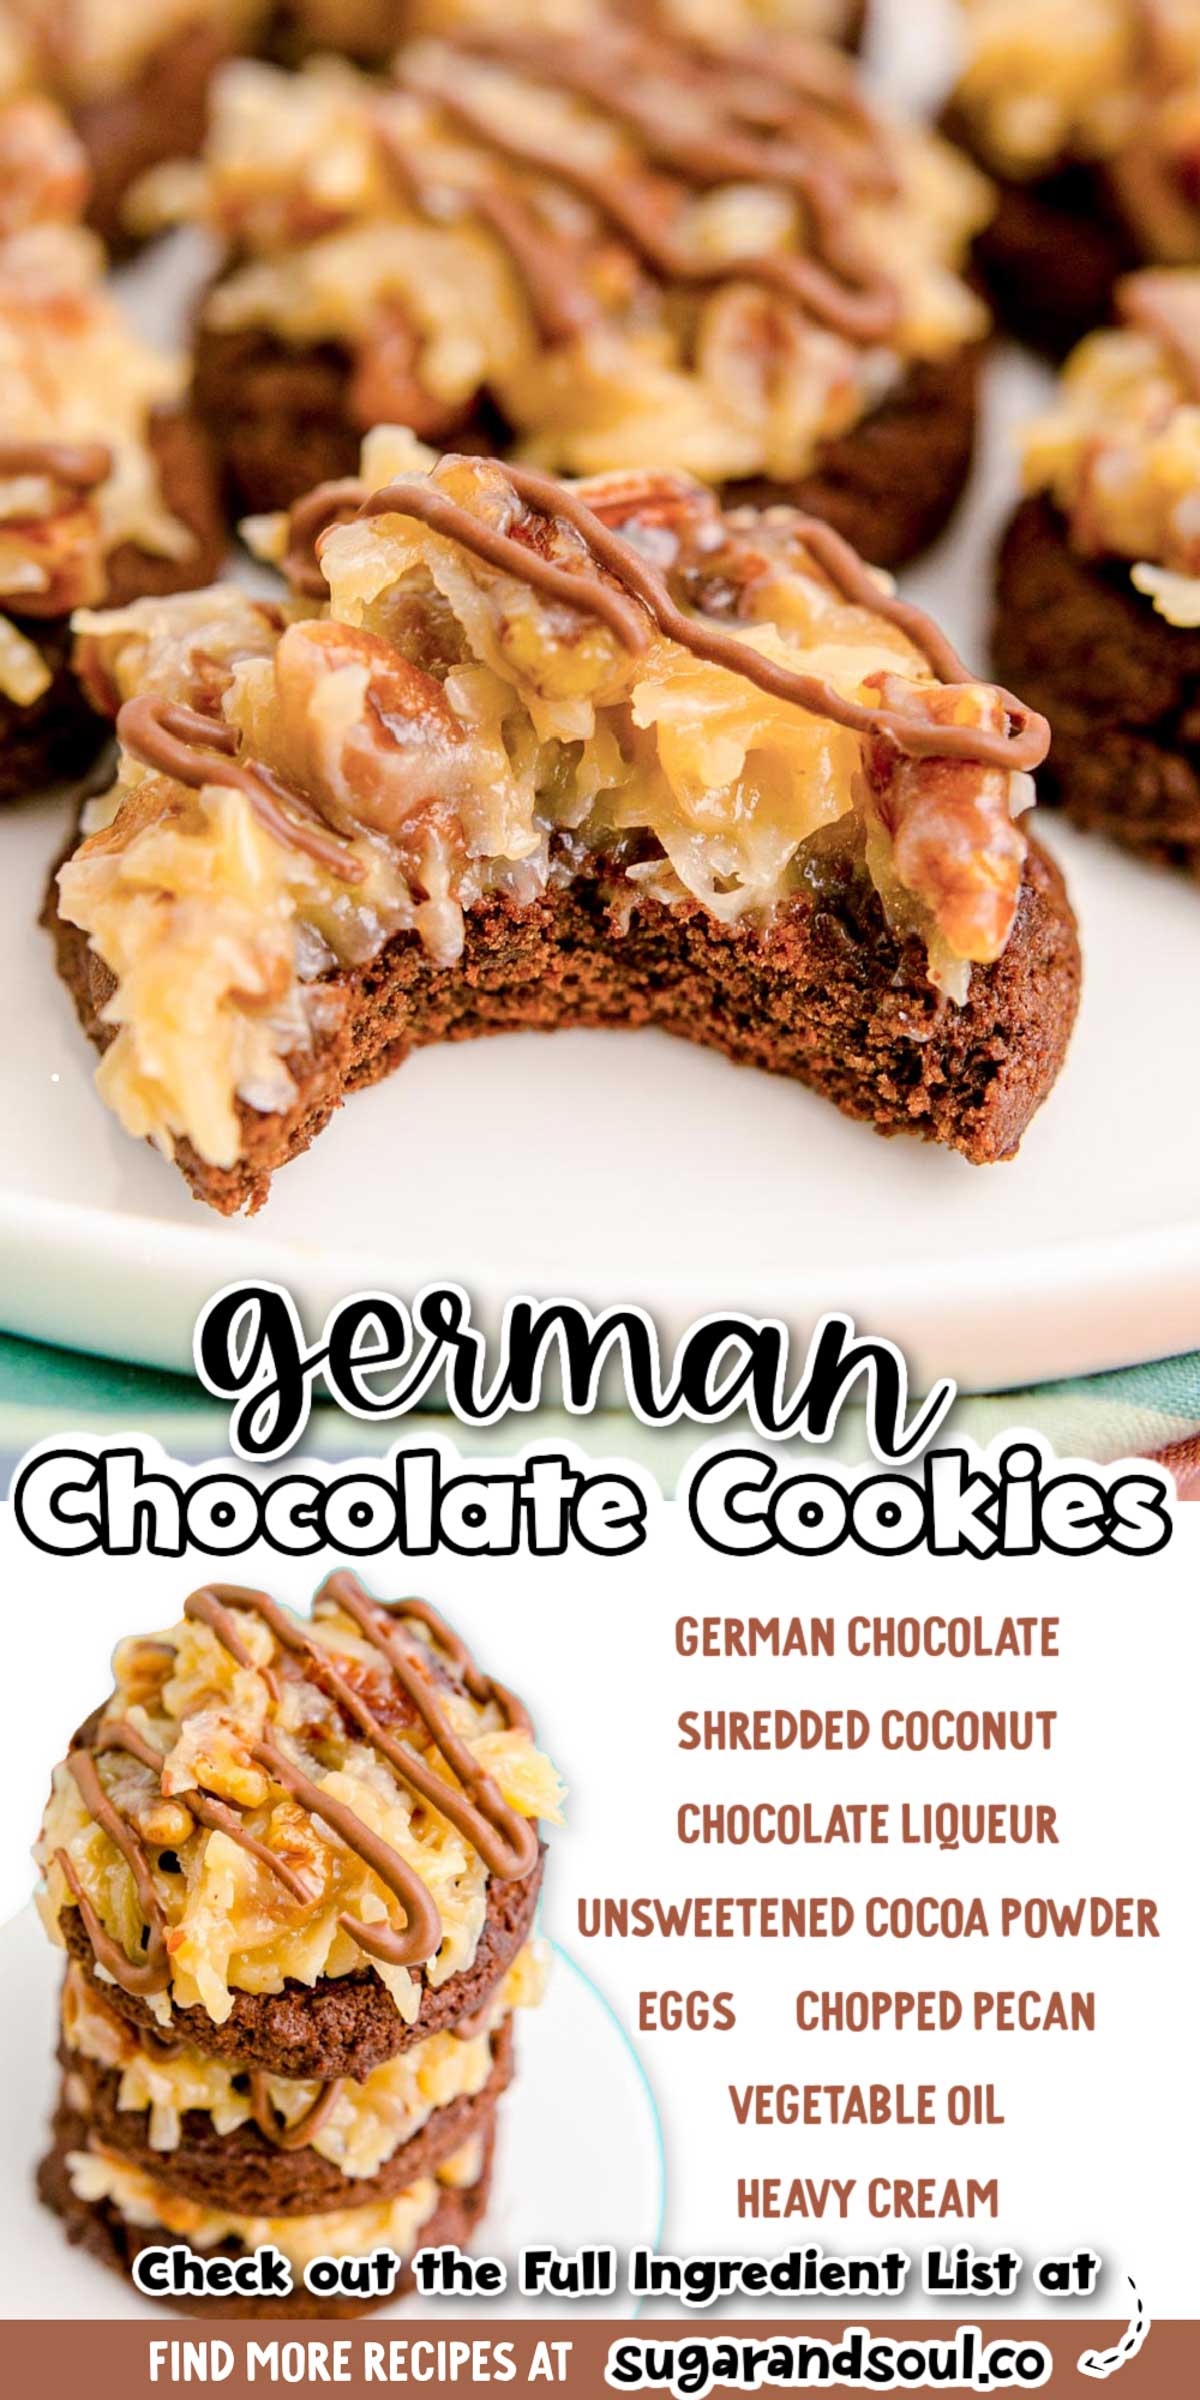 German Chocolate Cookies combines chewy chocolate cookies and rich coconut pecan frosting for a decadent dessert that's ready in 40 minutes! via @sugarandsoulco